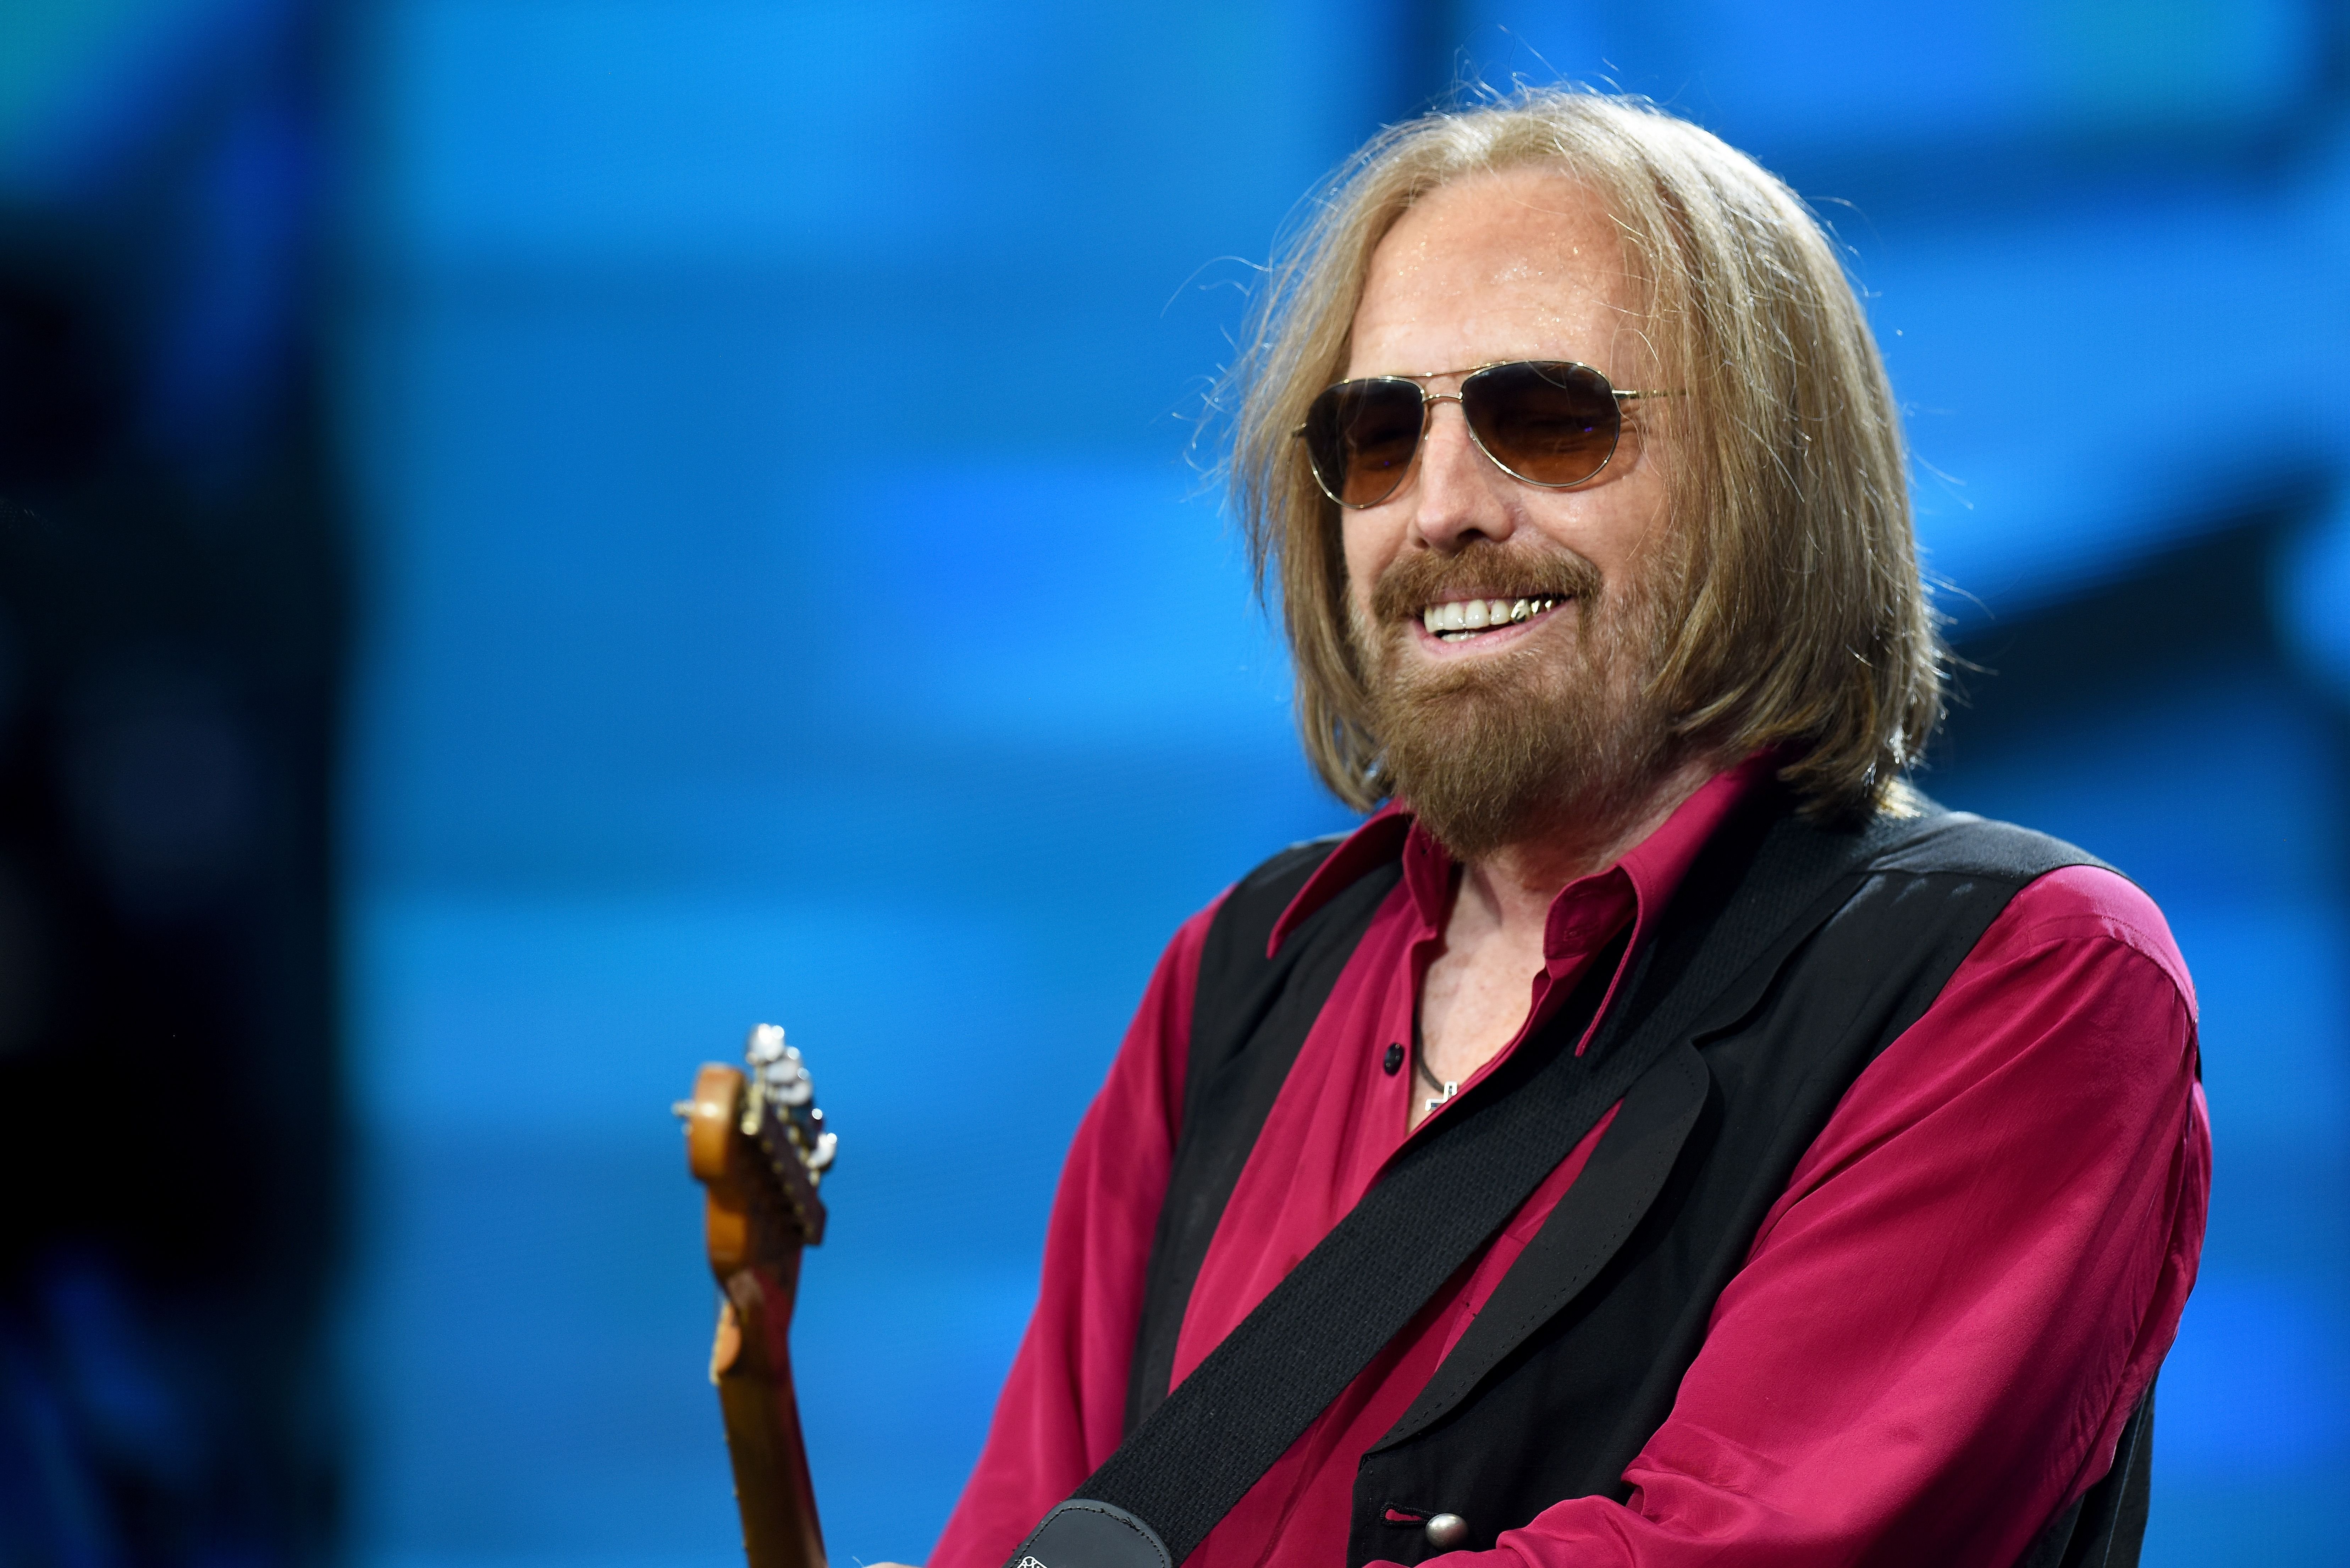 Tom Petty performs on stage at the Barclaycard Presents British Summer Time Festival in Hyde Park on July 9, 2017 in London, England. | Source: Getty Images